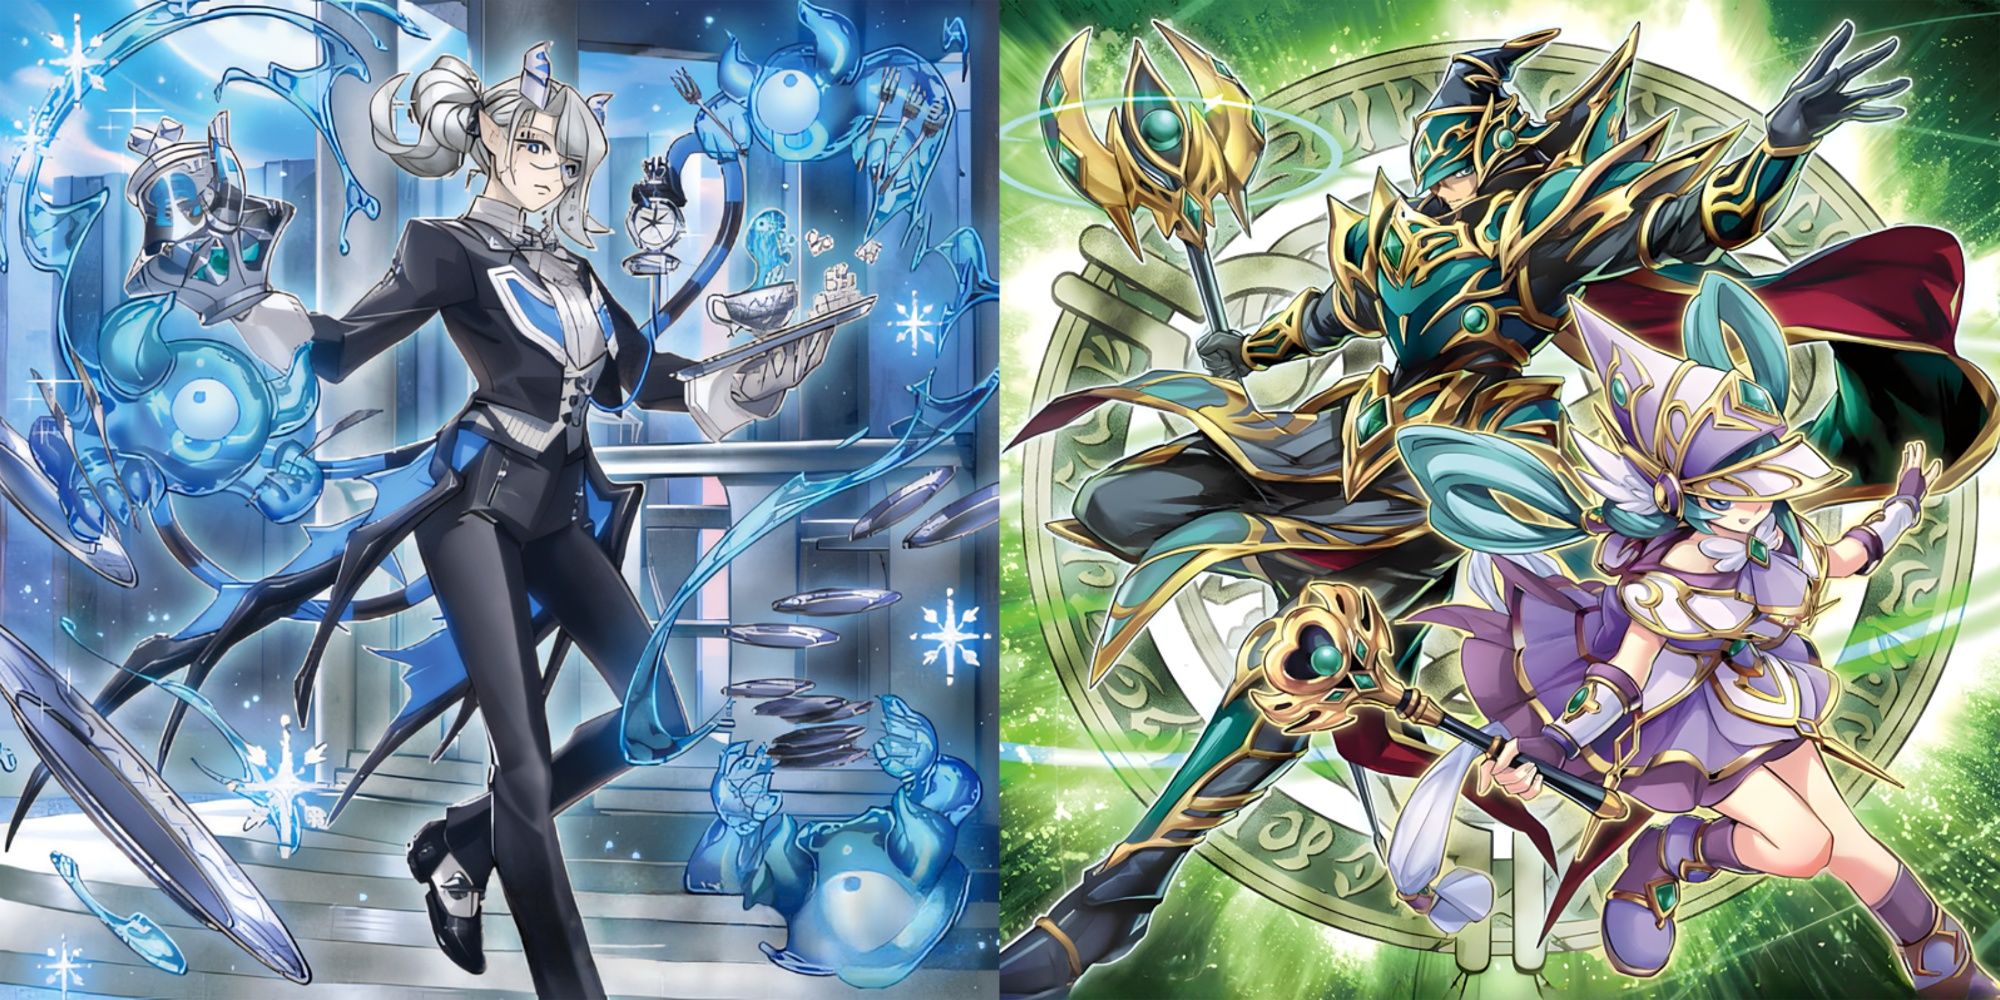 Yu-Gi-Oh! Card Full Art: Arias The Labrynth Butler (Left) and Magicians of Bond and Unity (RIght) 